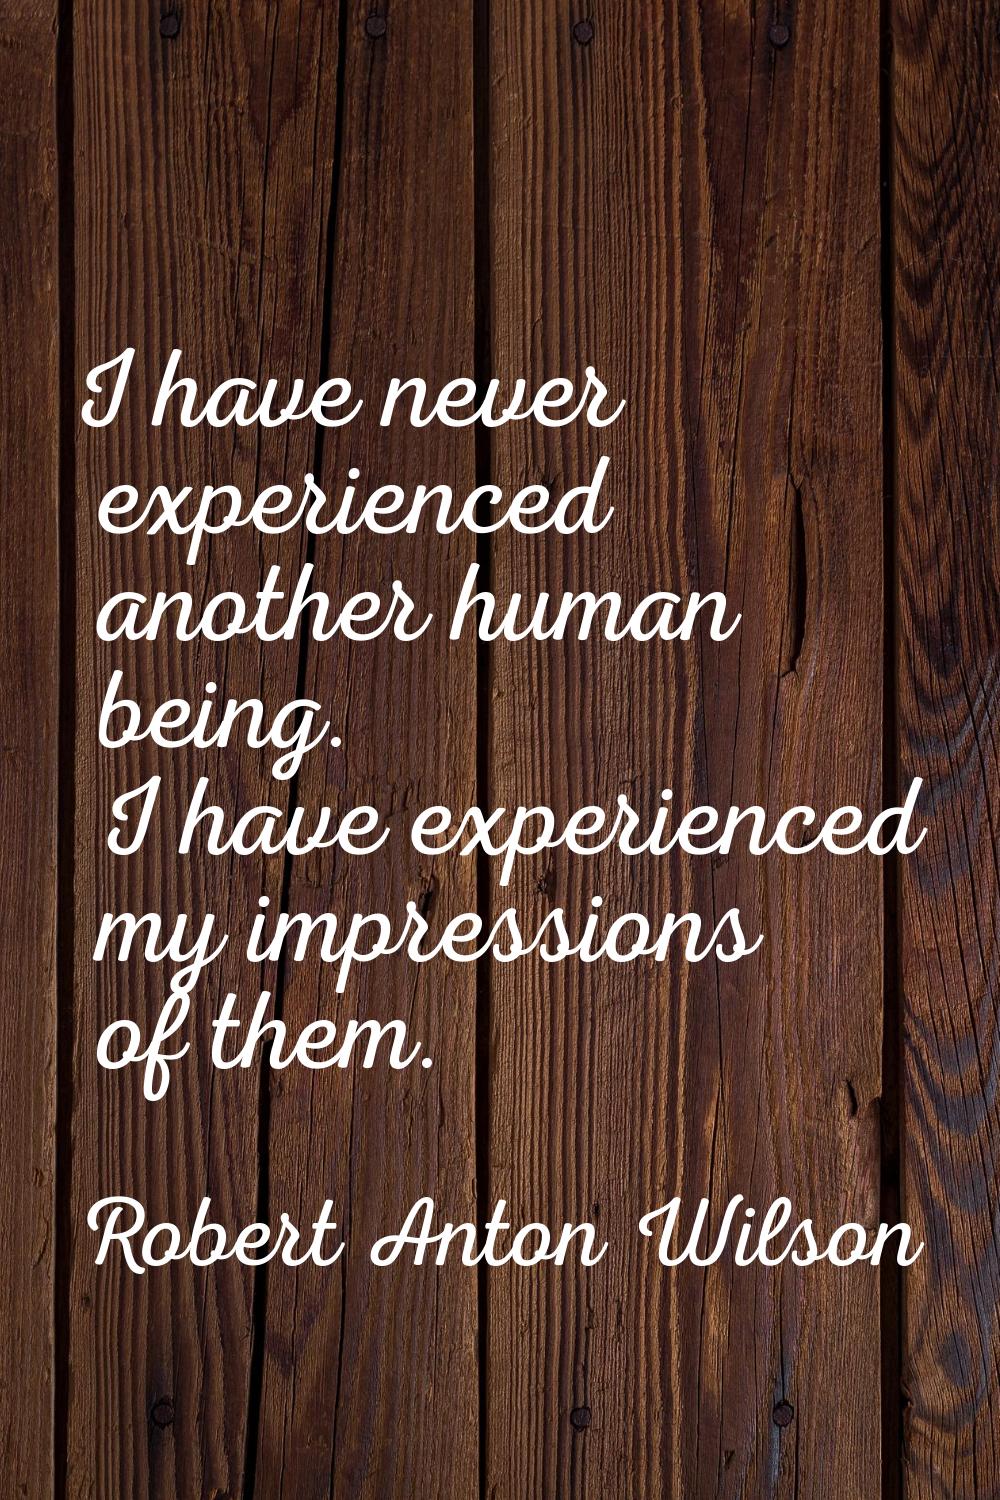 I have never experienced another human being. I have experienced my impressions of them.